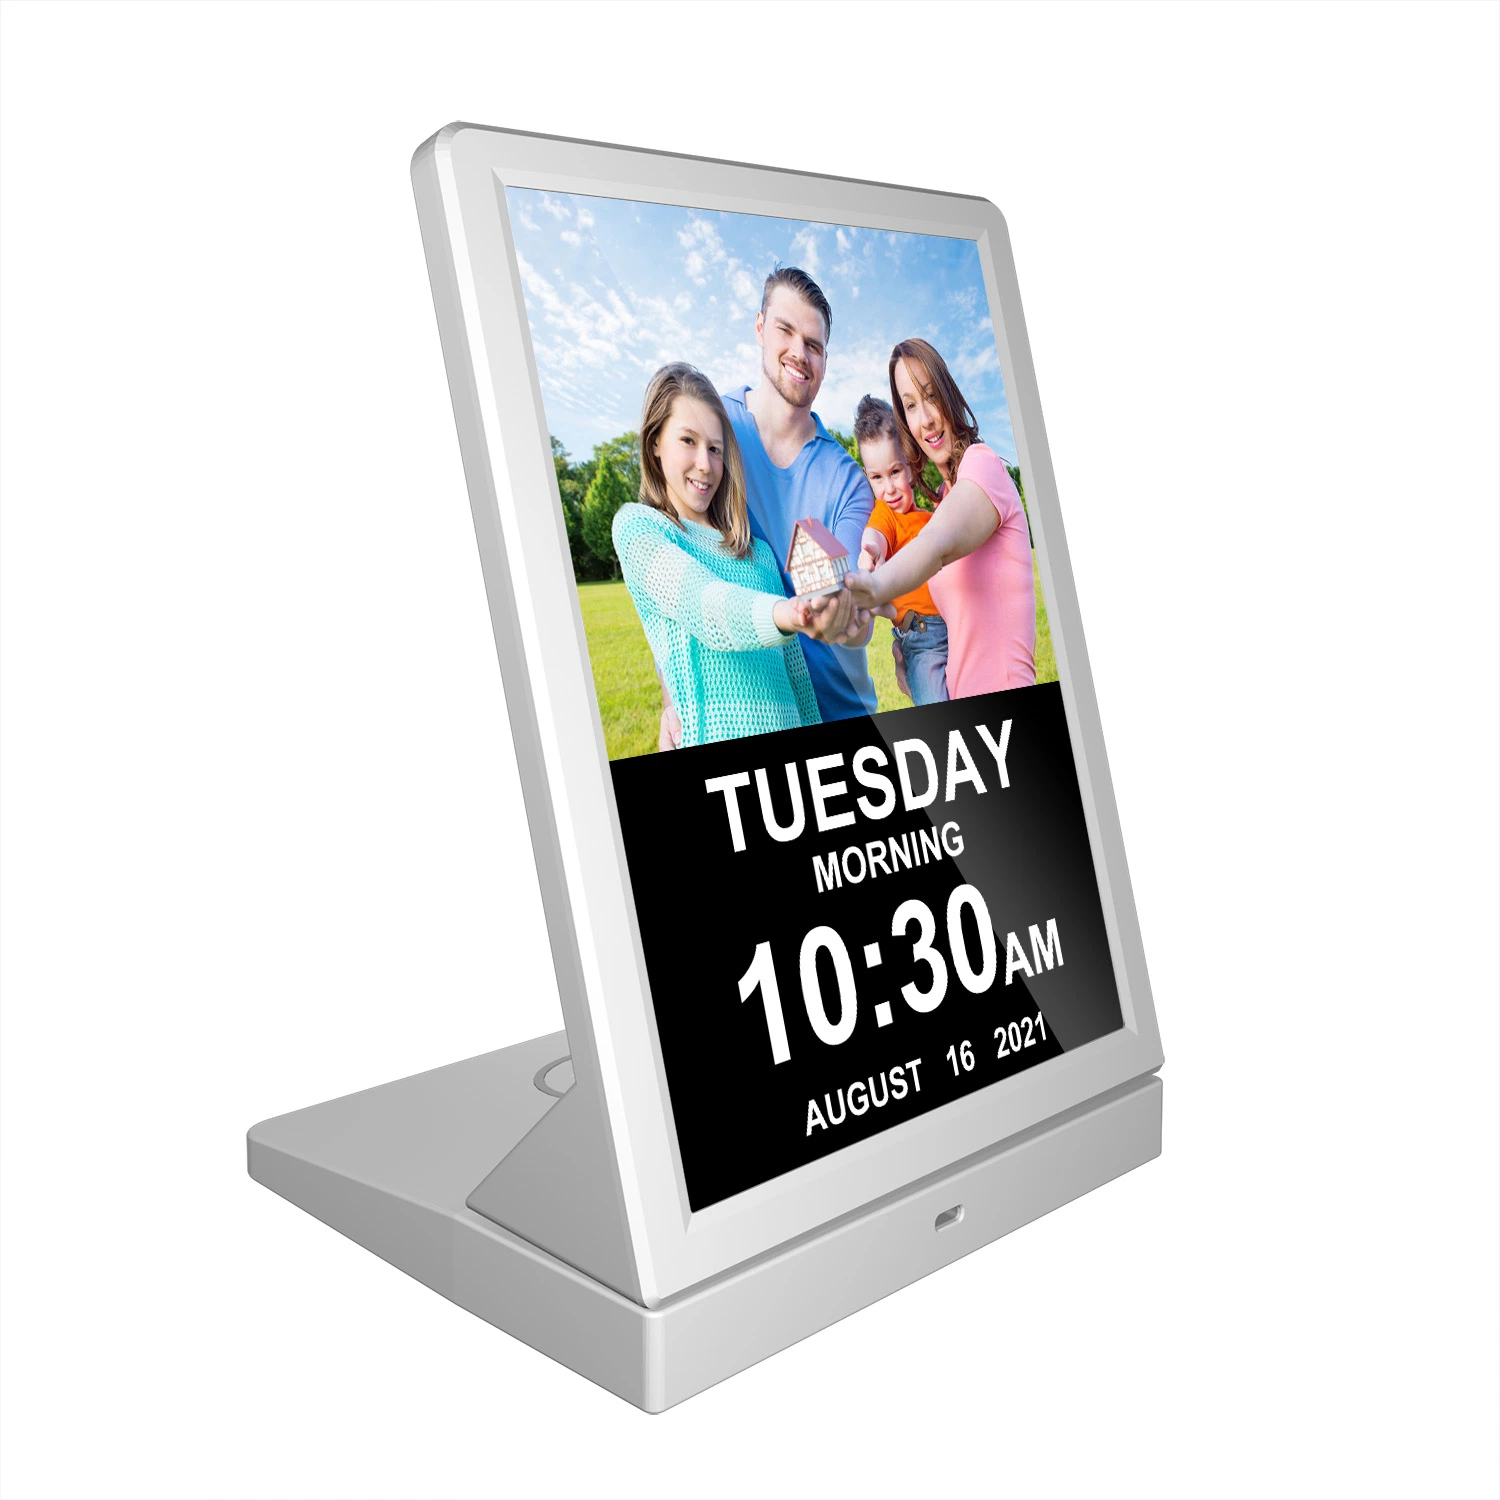 Holiday Gifts 9.7 Inch LCD Advertising Player with Wireless Charger